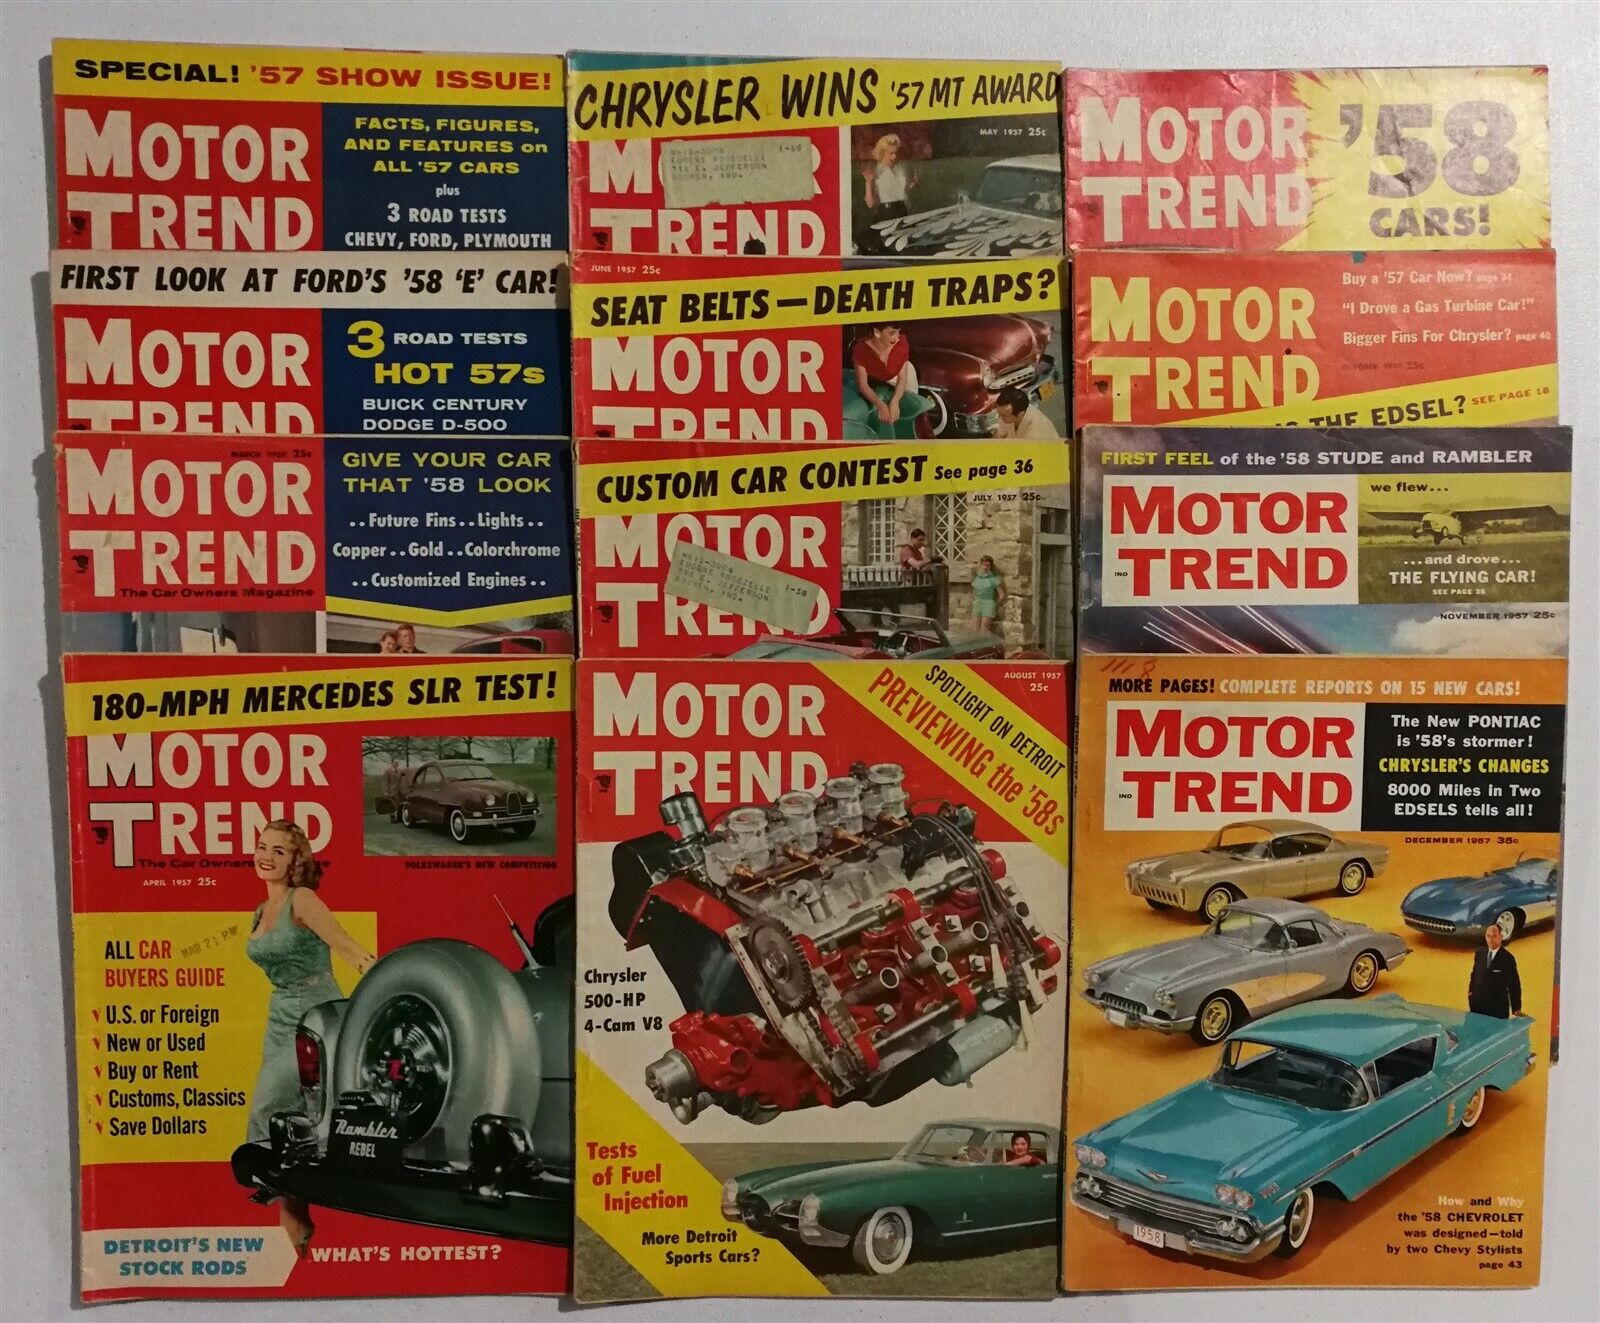 Motor Trend Magazine 1957 - The Complete Year - All 12 Issues 